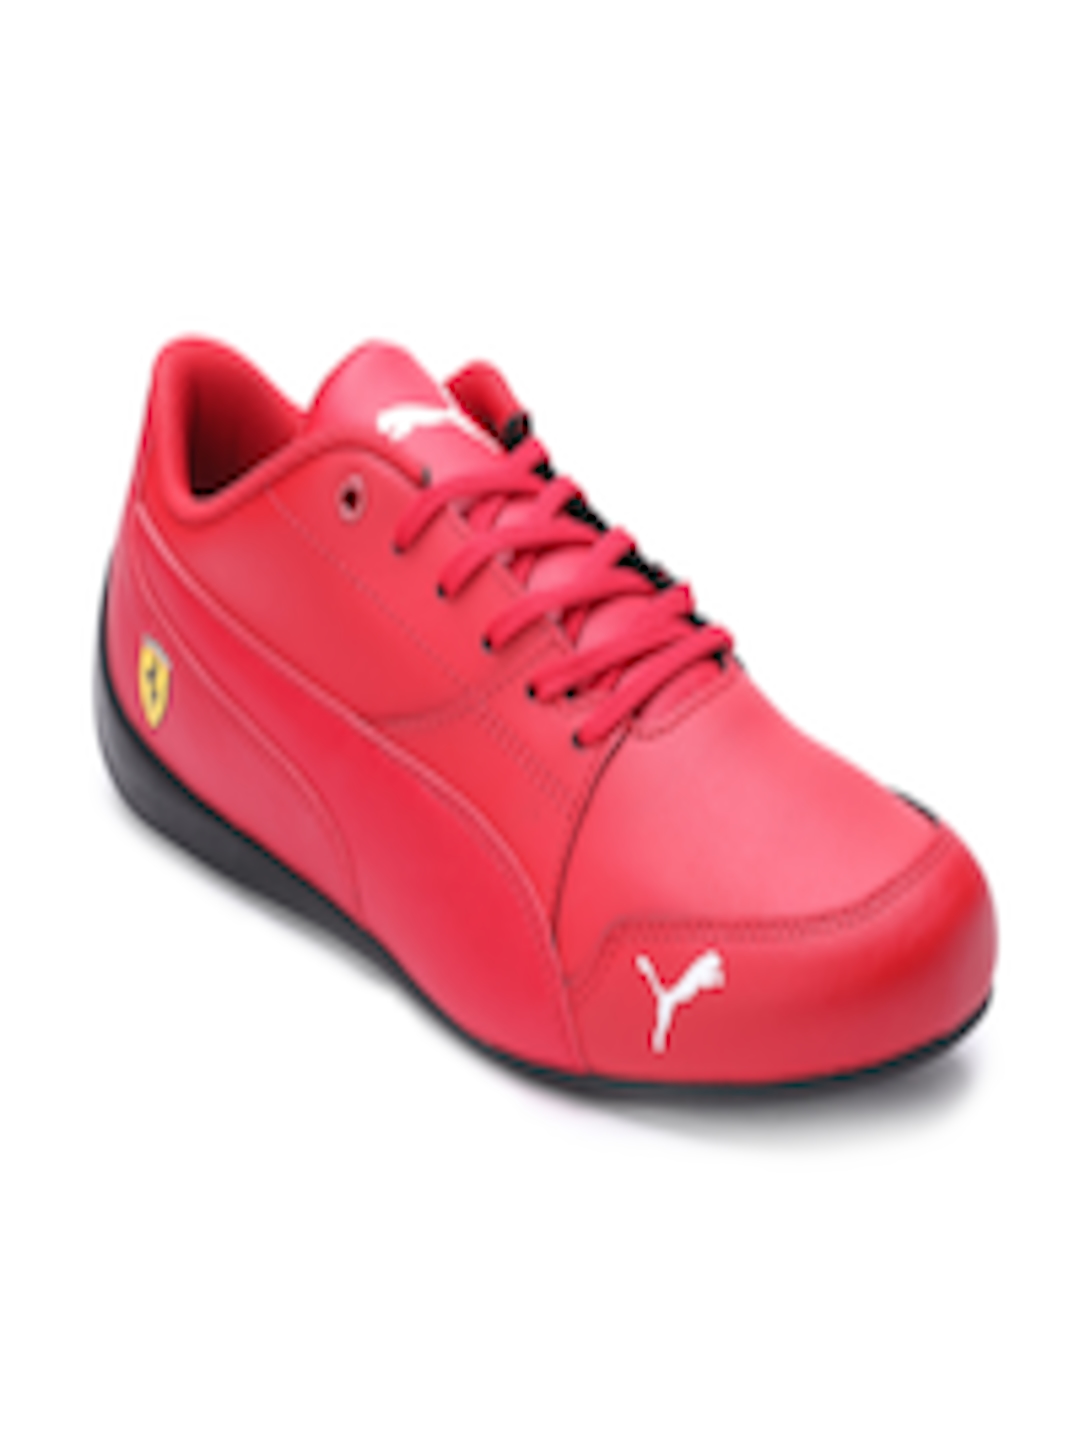 Buy PUMA Motorsport Unisex Red Leather Sneakers - Casual Shoes for ...